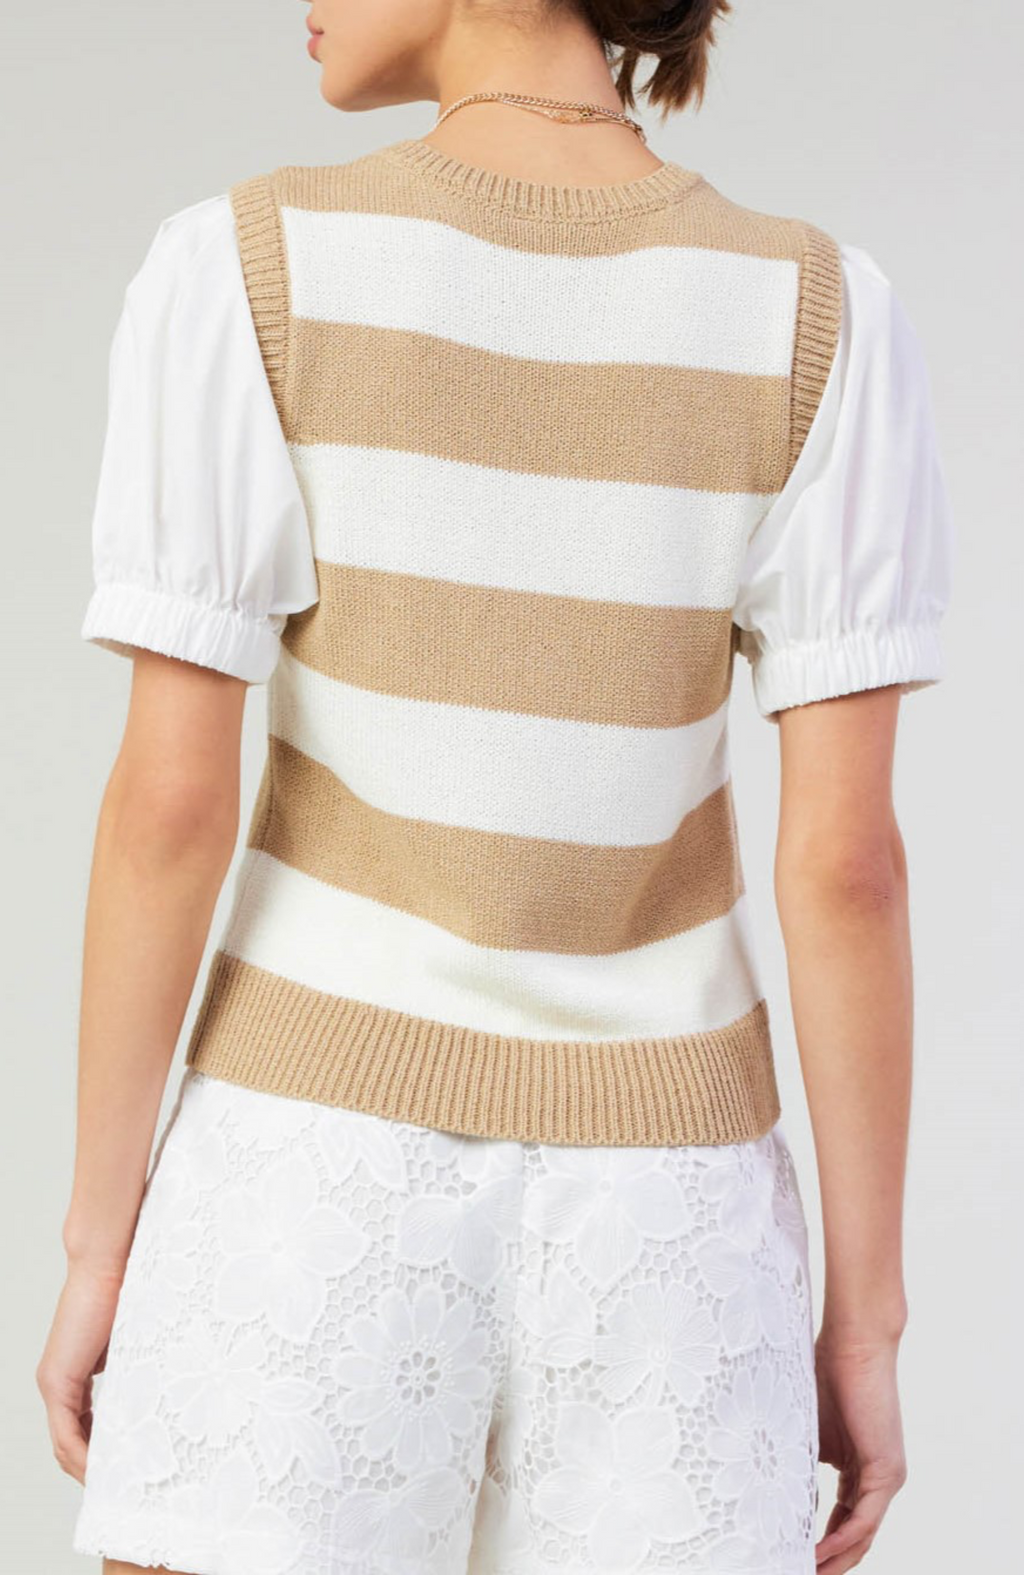 Current Air - Woven Combo Sweater Vest